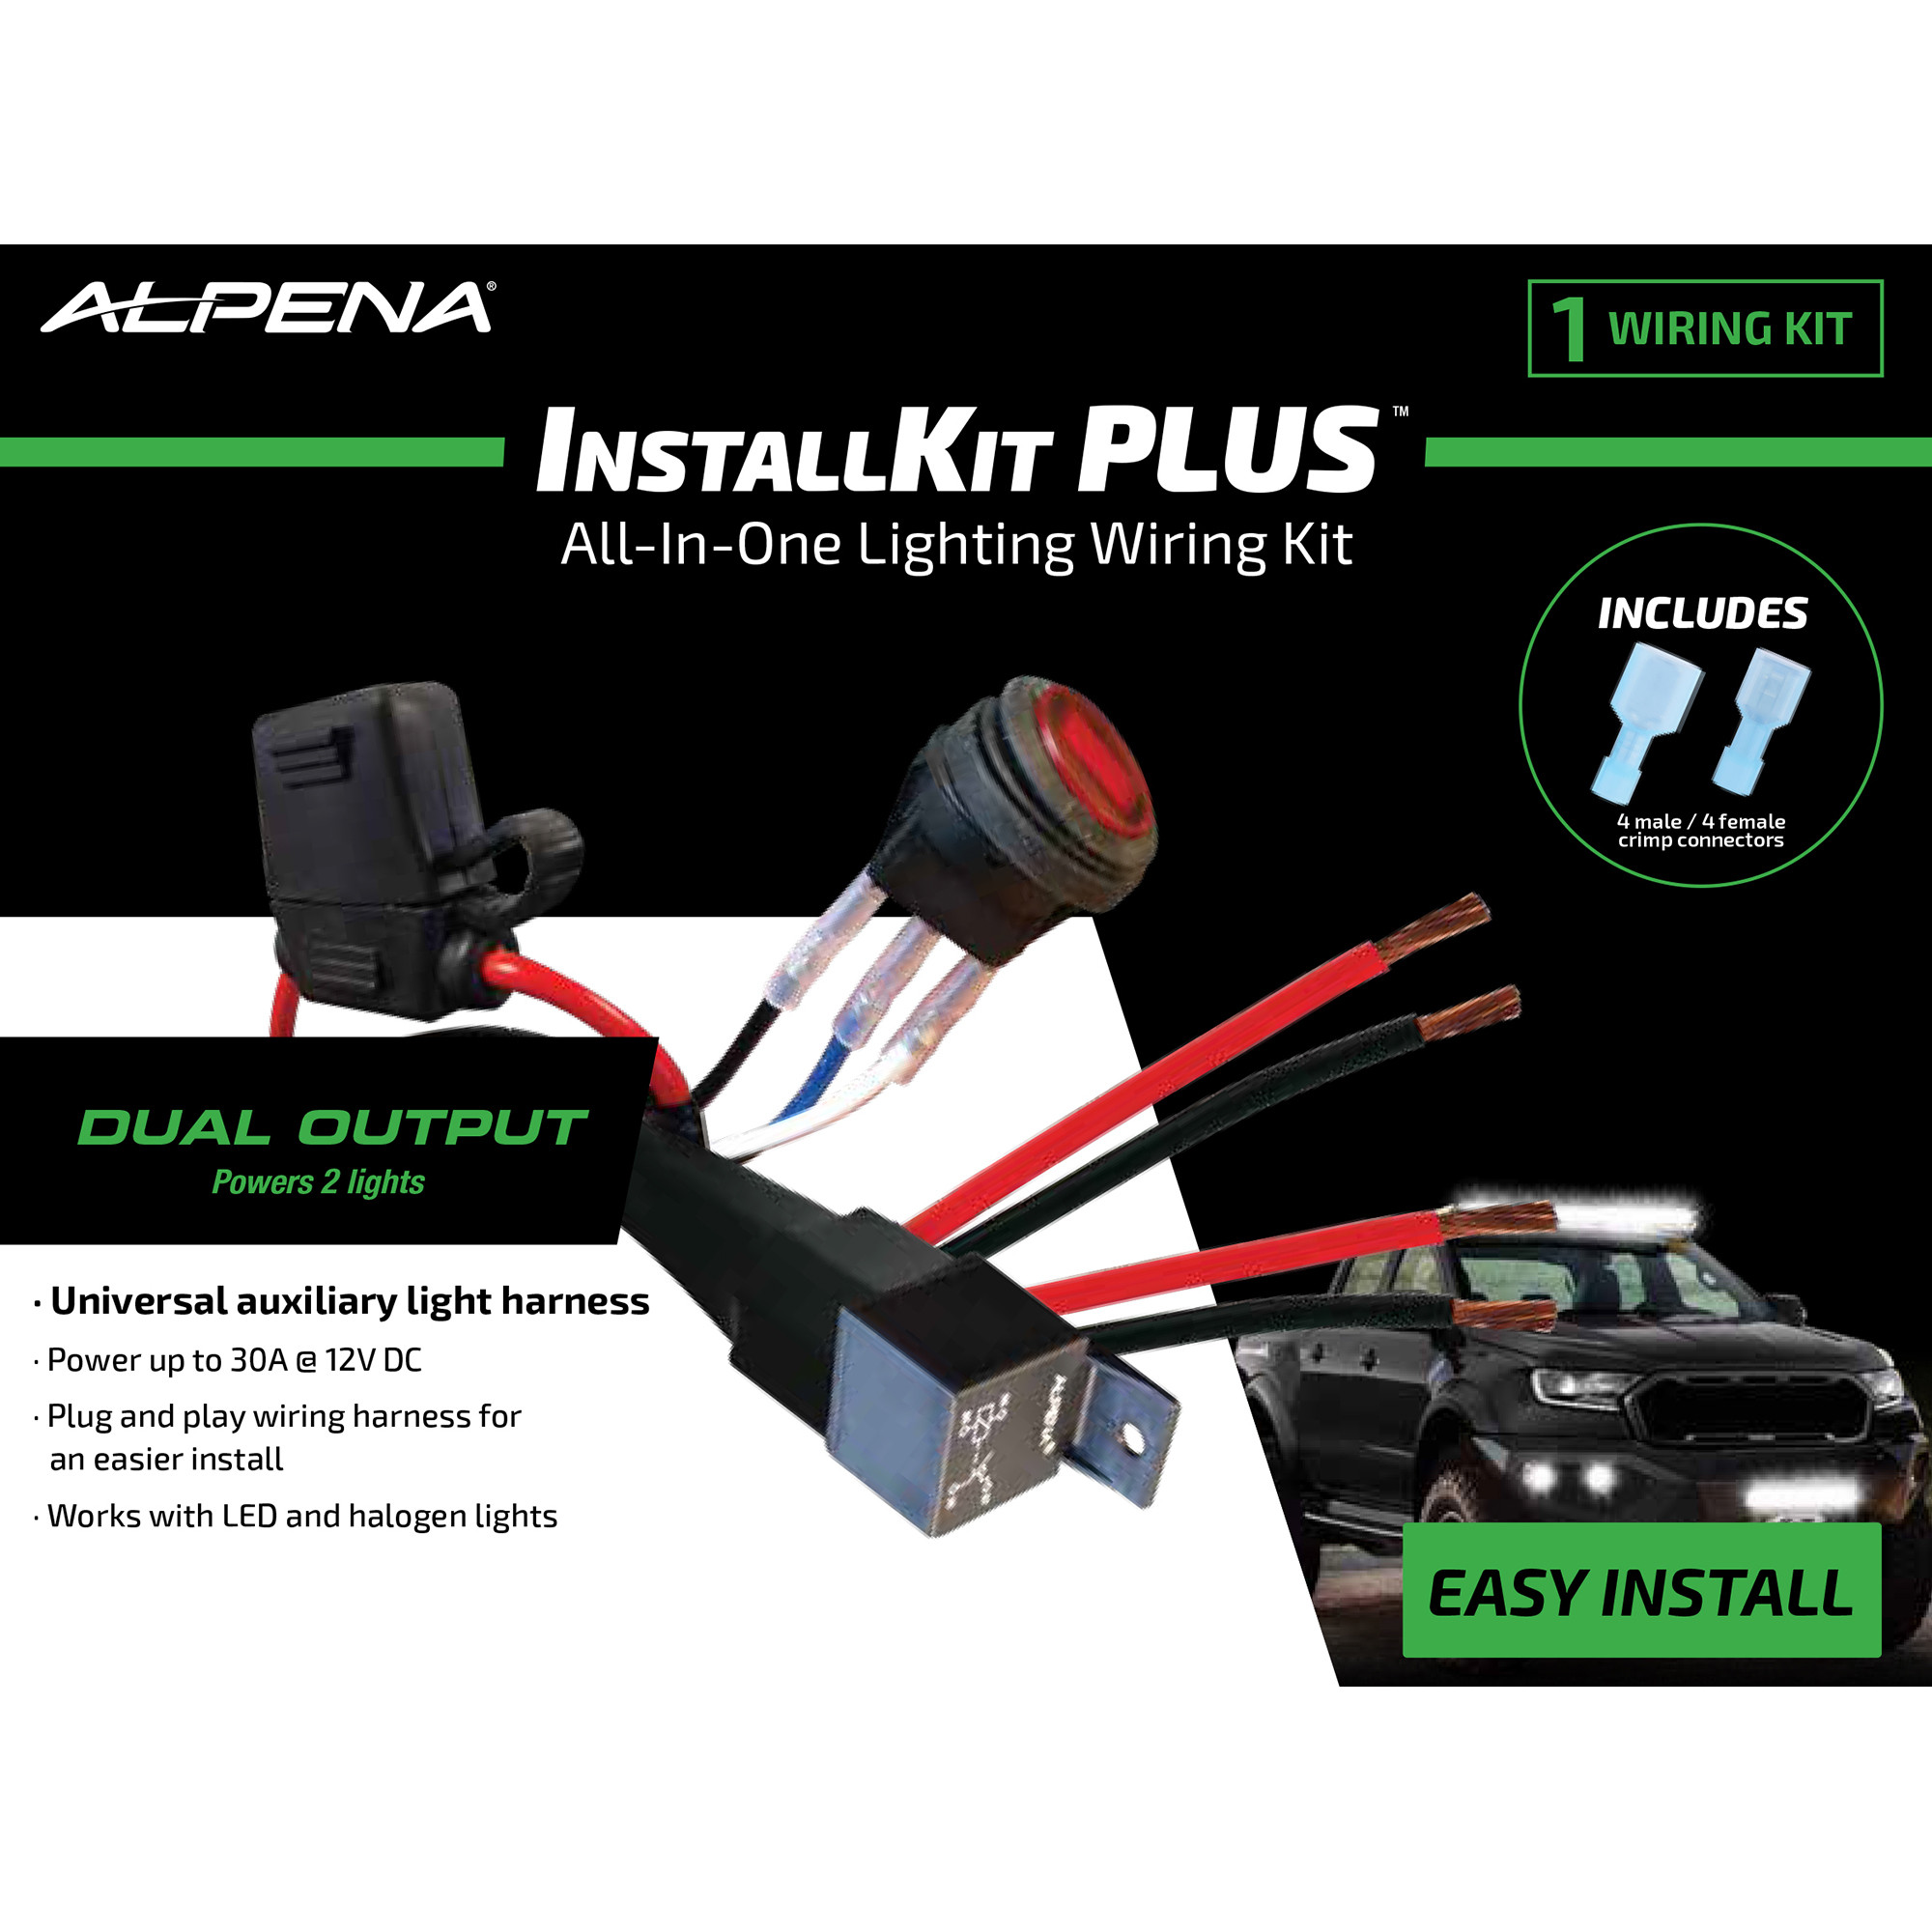 Add Fog Lamps to Classic Car by Relay Wiring Alpena Install Kit Plus, Illuminated Interior Switch, Inline Fuse Holder, Relay, 12v System, Model 77631 Of Add Fog Lamps to Classic Car by Relay Wiring